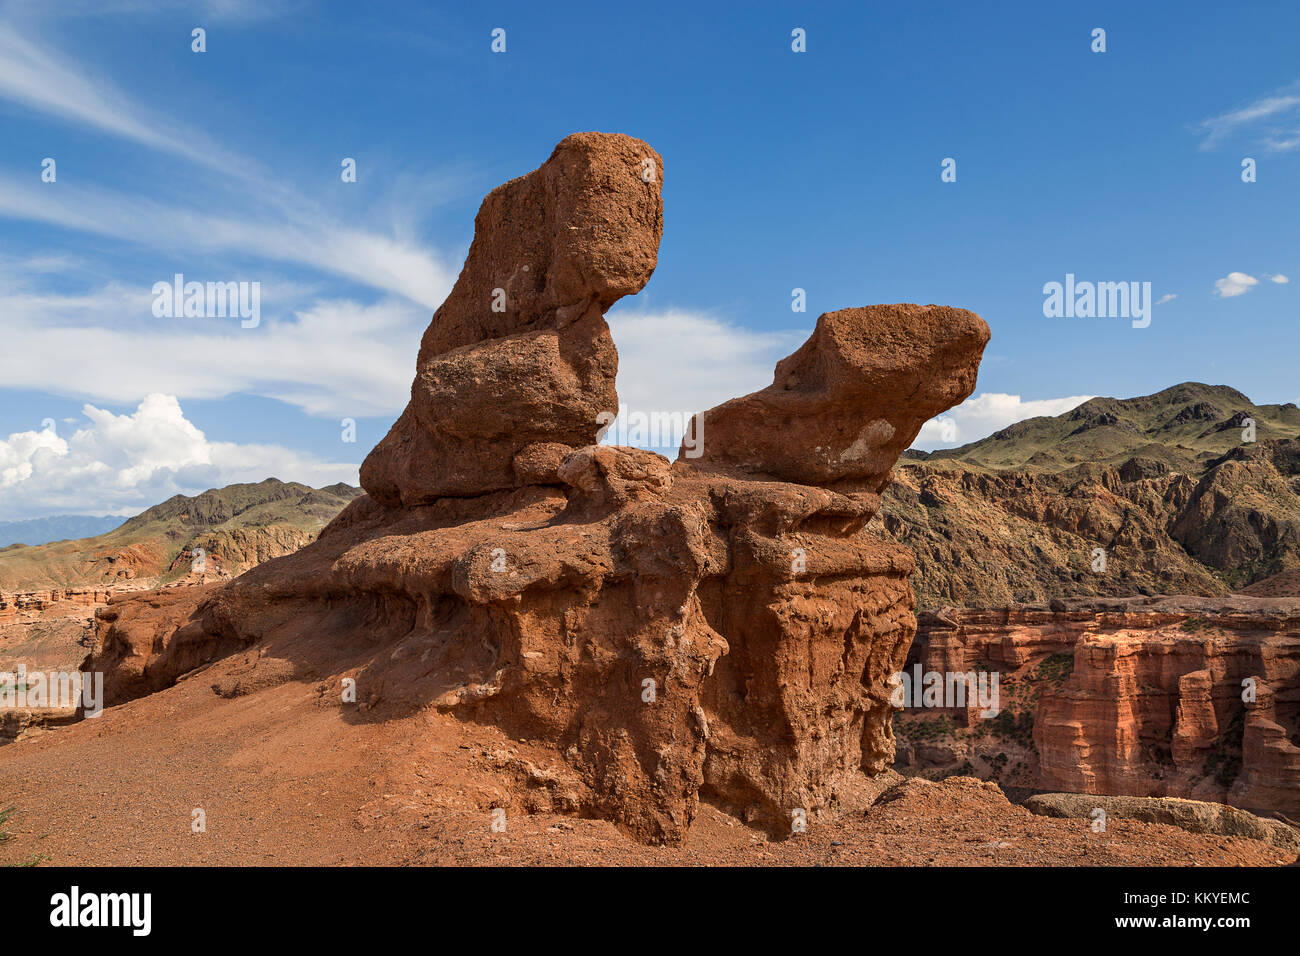 View over the rock formations in Charyn Canyon in Kazakhstan. Stock Photo